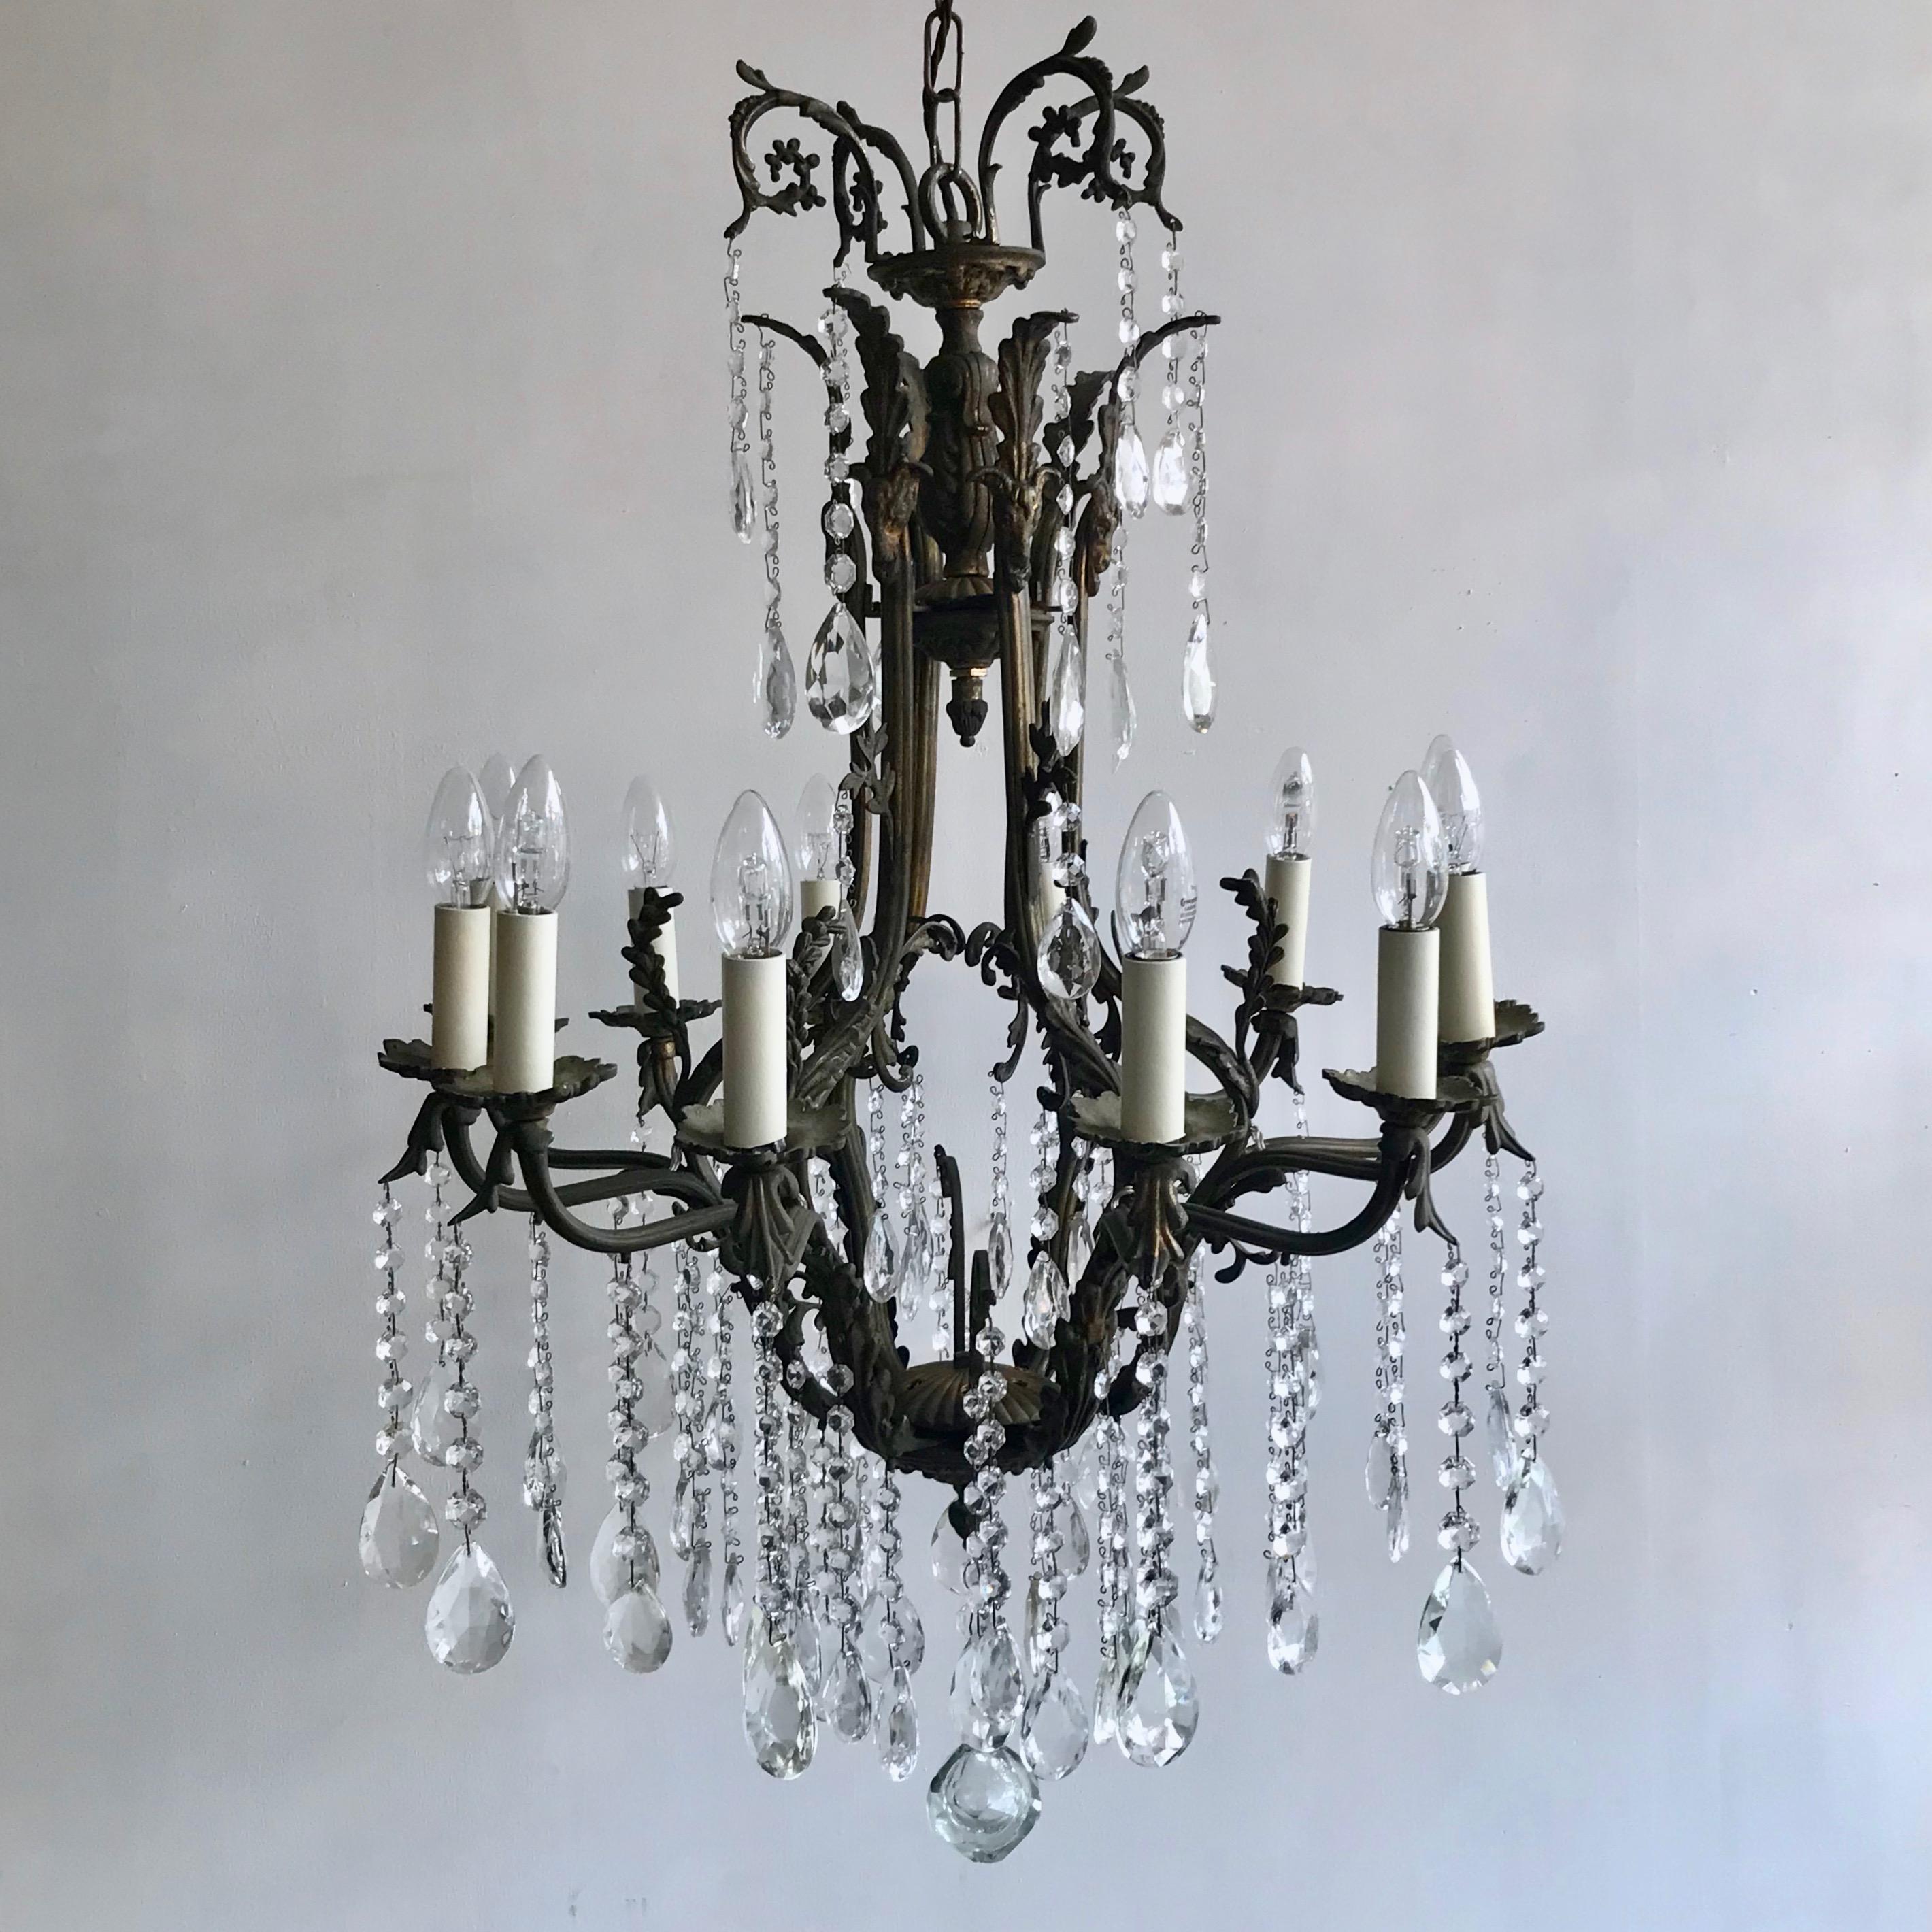 Cast Early 20th Century Italian Ornate Birdcage Chandelier with Crystal Pear Drops